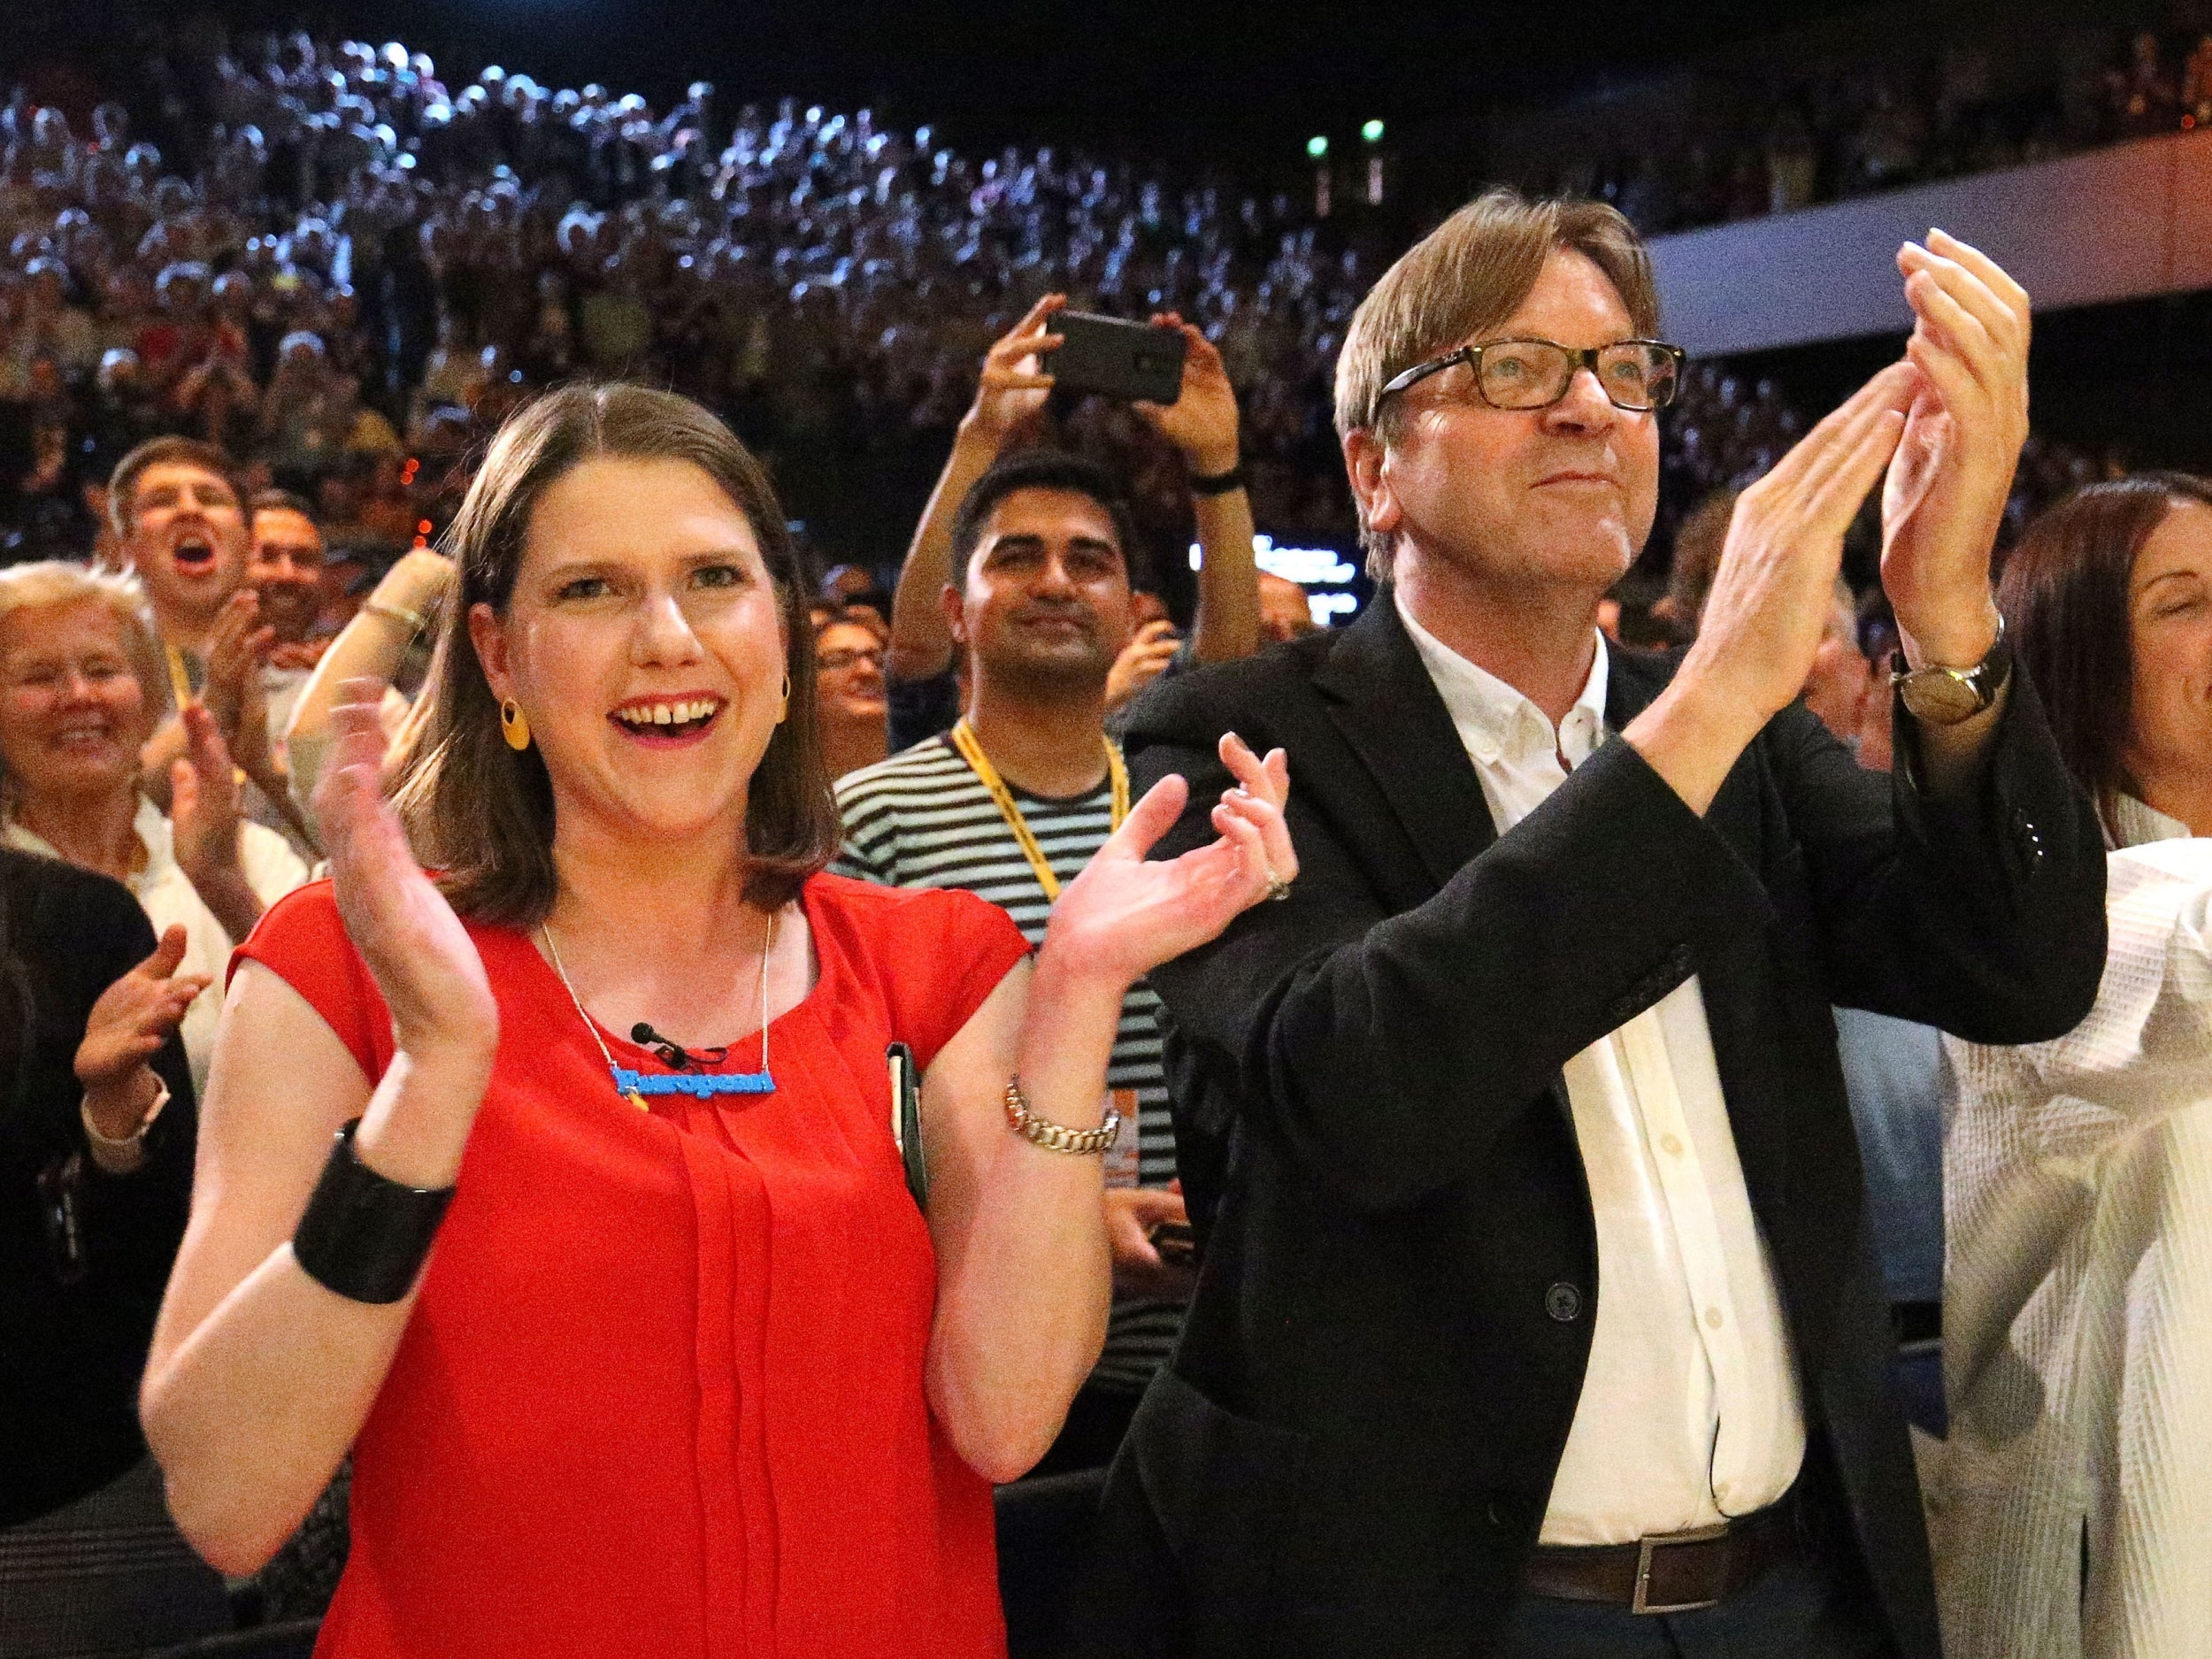 Jo Swinson with the European parliament’s Brexit coordinator Guy Verhofstadt at the Lib Dem conference on Saturday